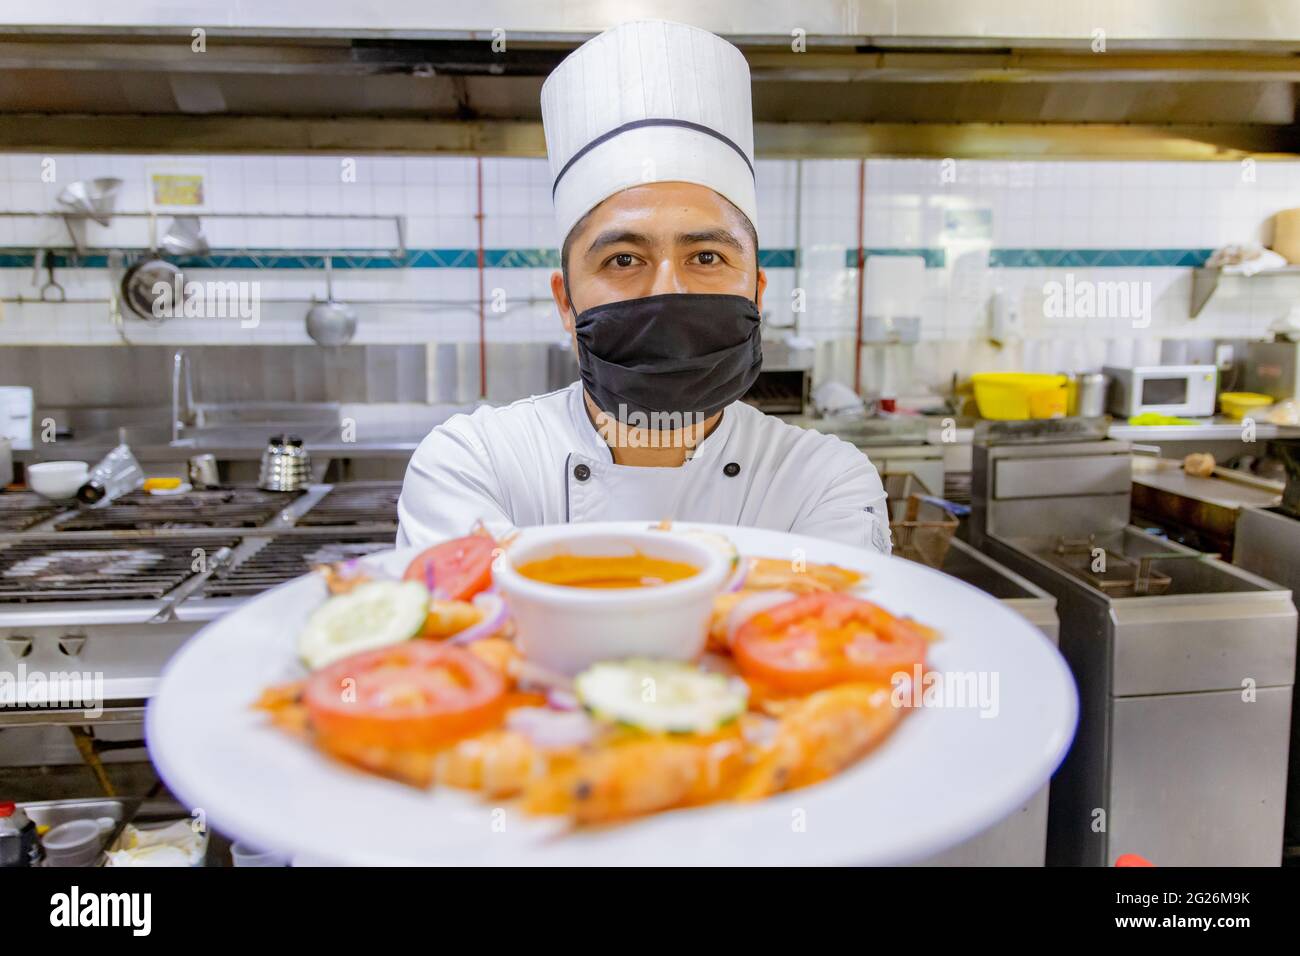 Portrait of Mexican Chef presenting plate in kitchen Stock Photo